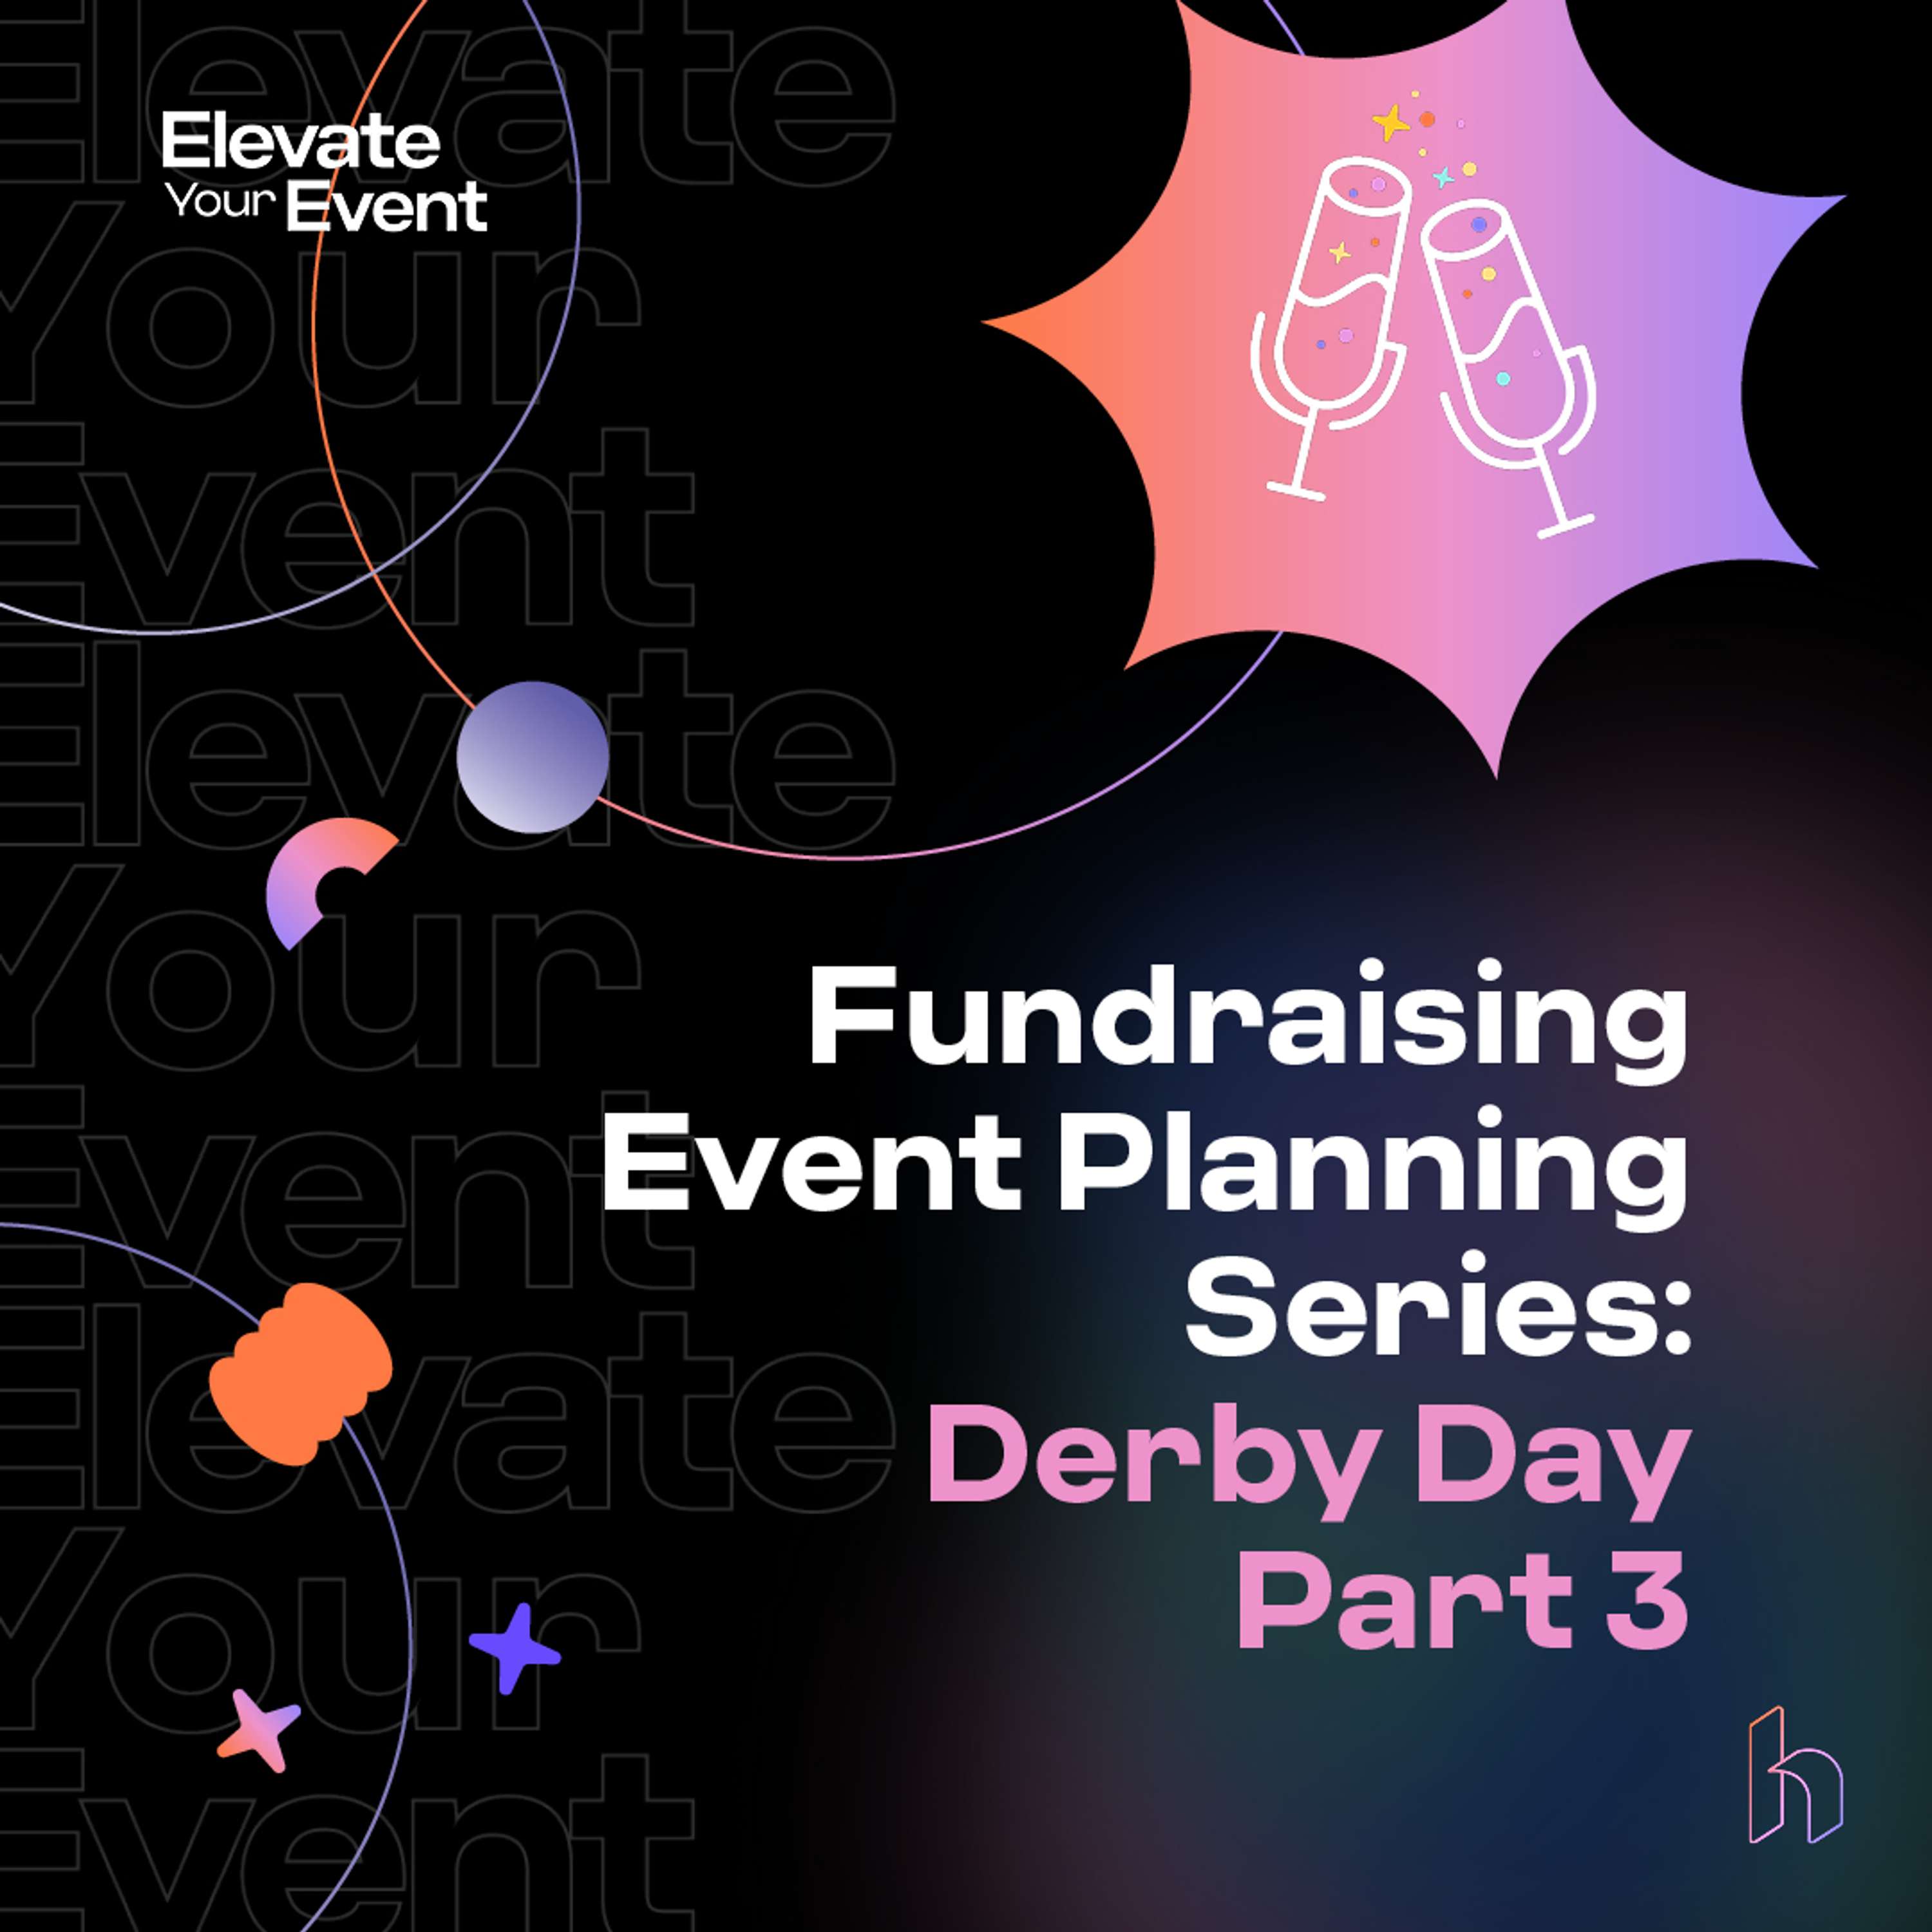 Fundraising Event Series: Derby Day Part 3